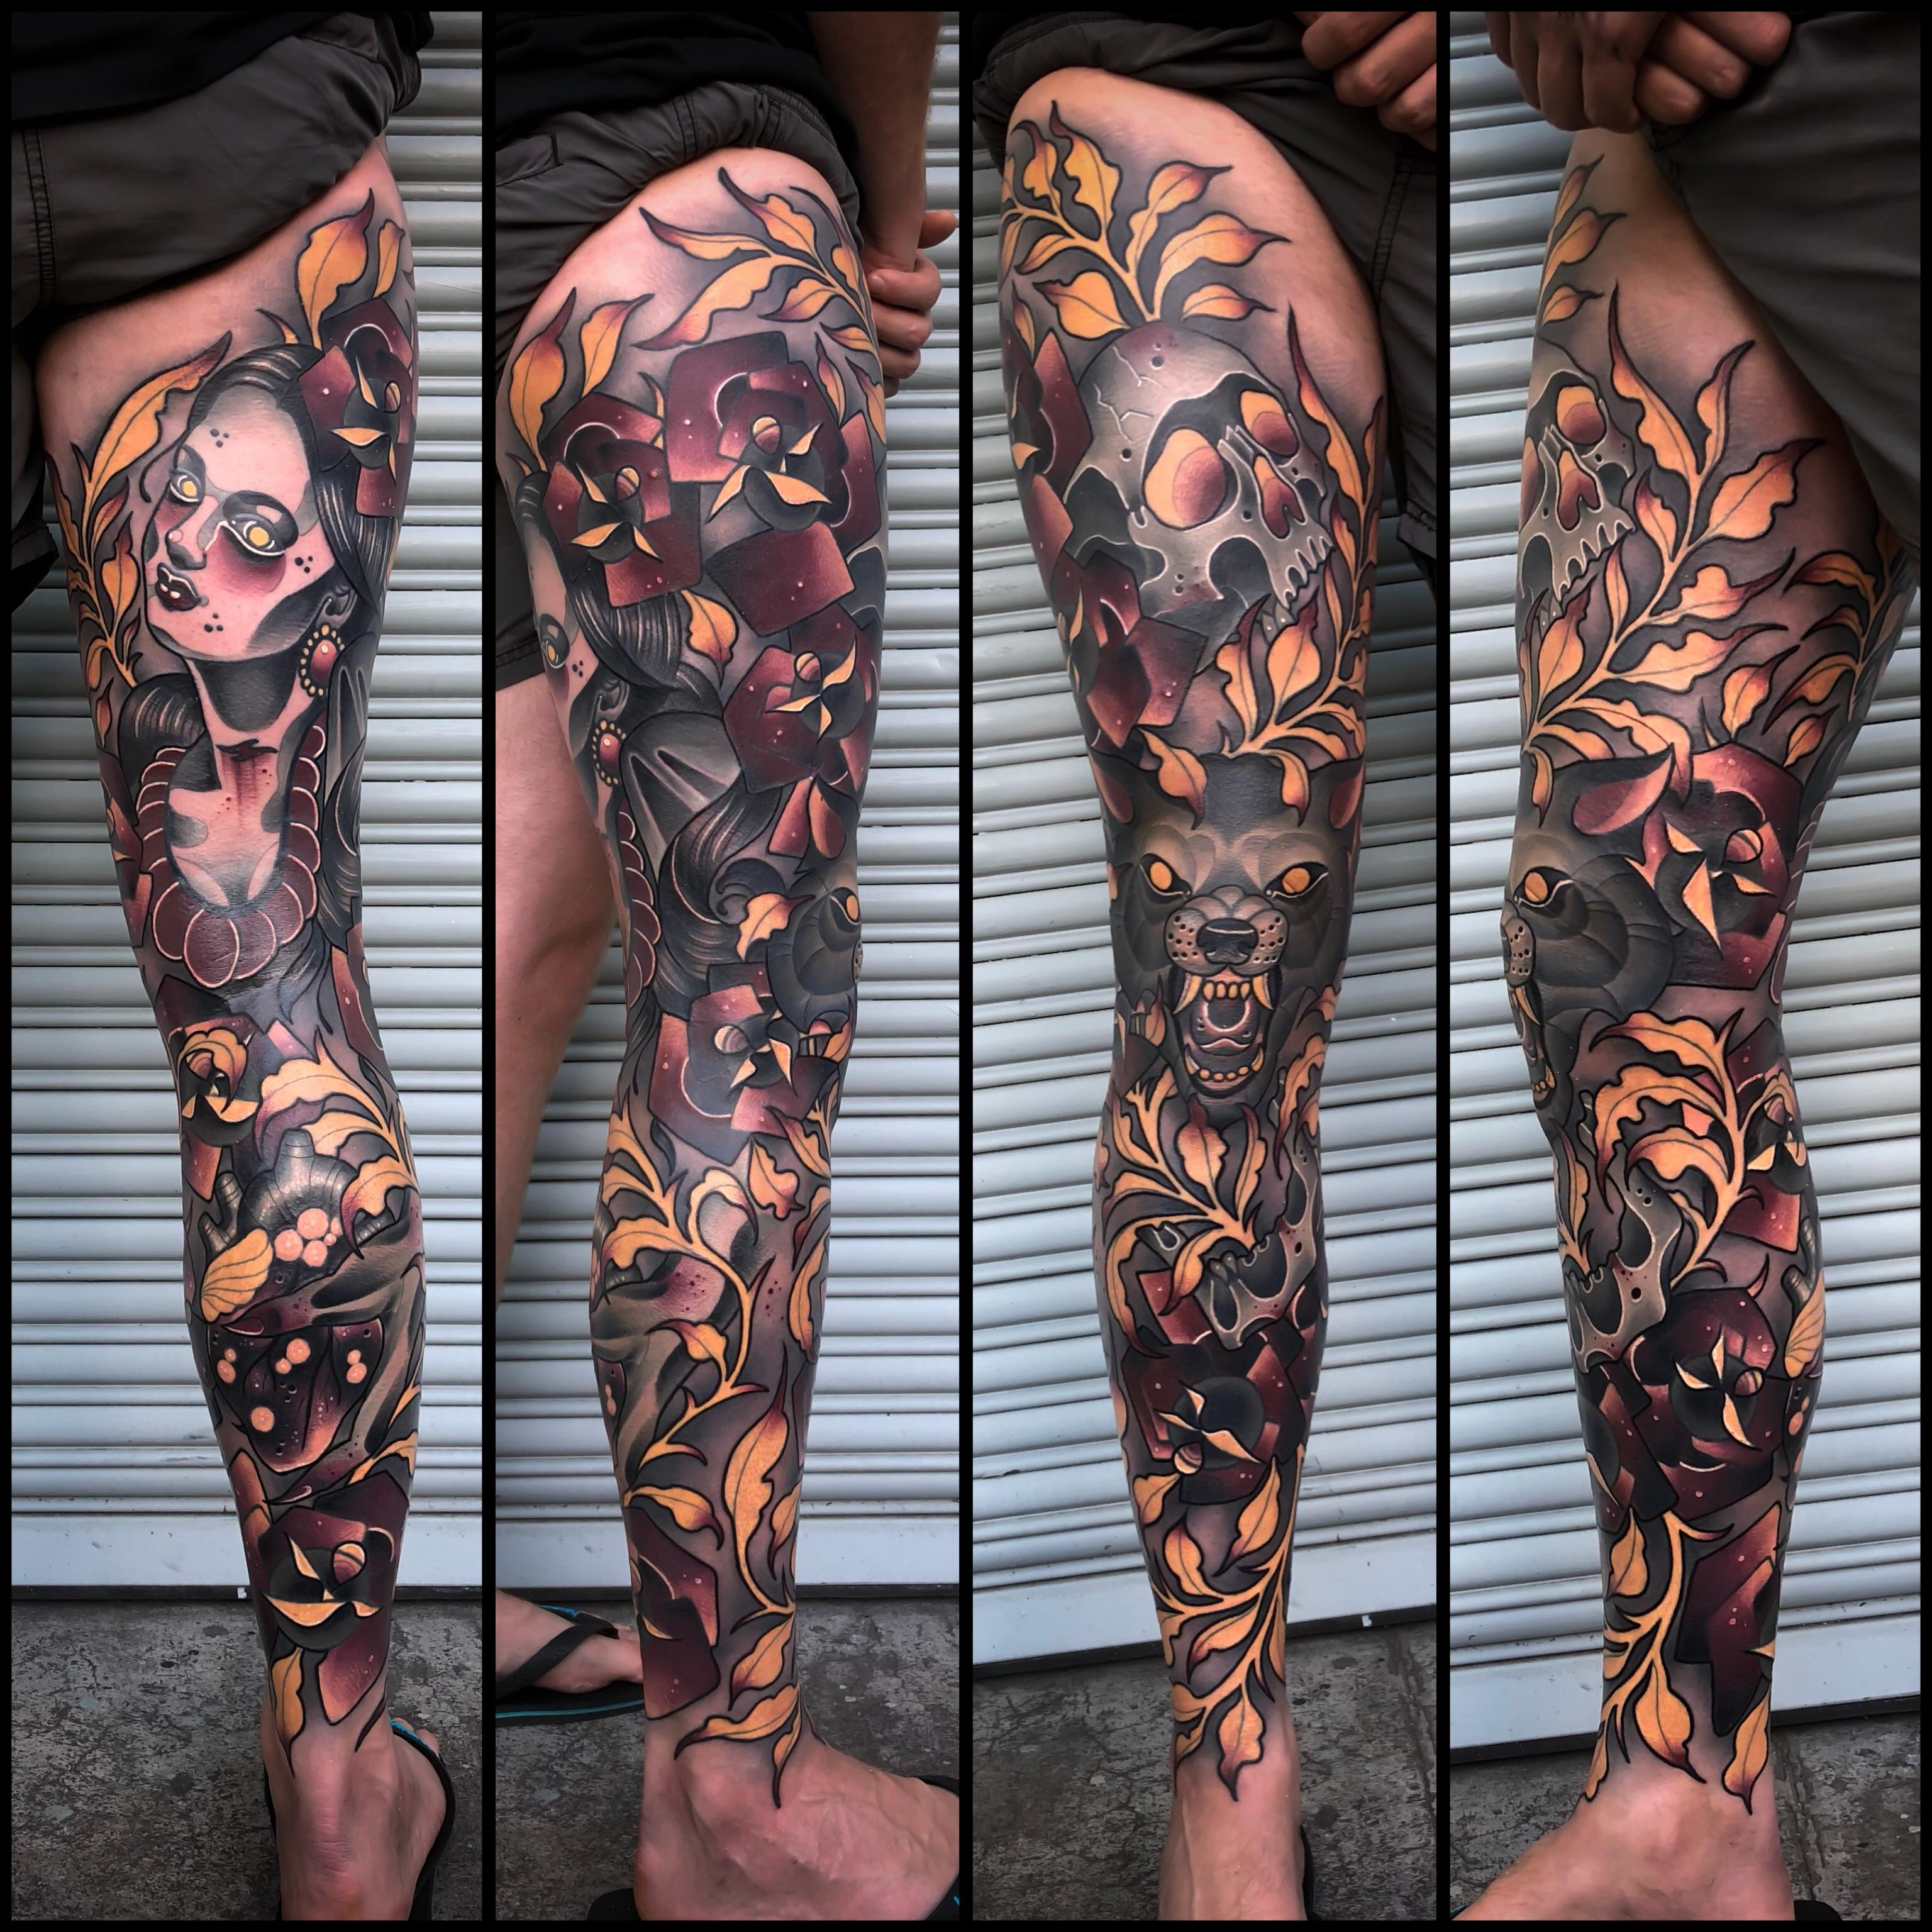 My Leg Sleeve Matt Curzon Out Of Empire In Prahran Melbourne with regard to sizing 3072 X 3072